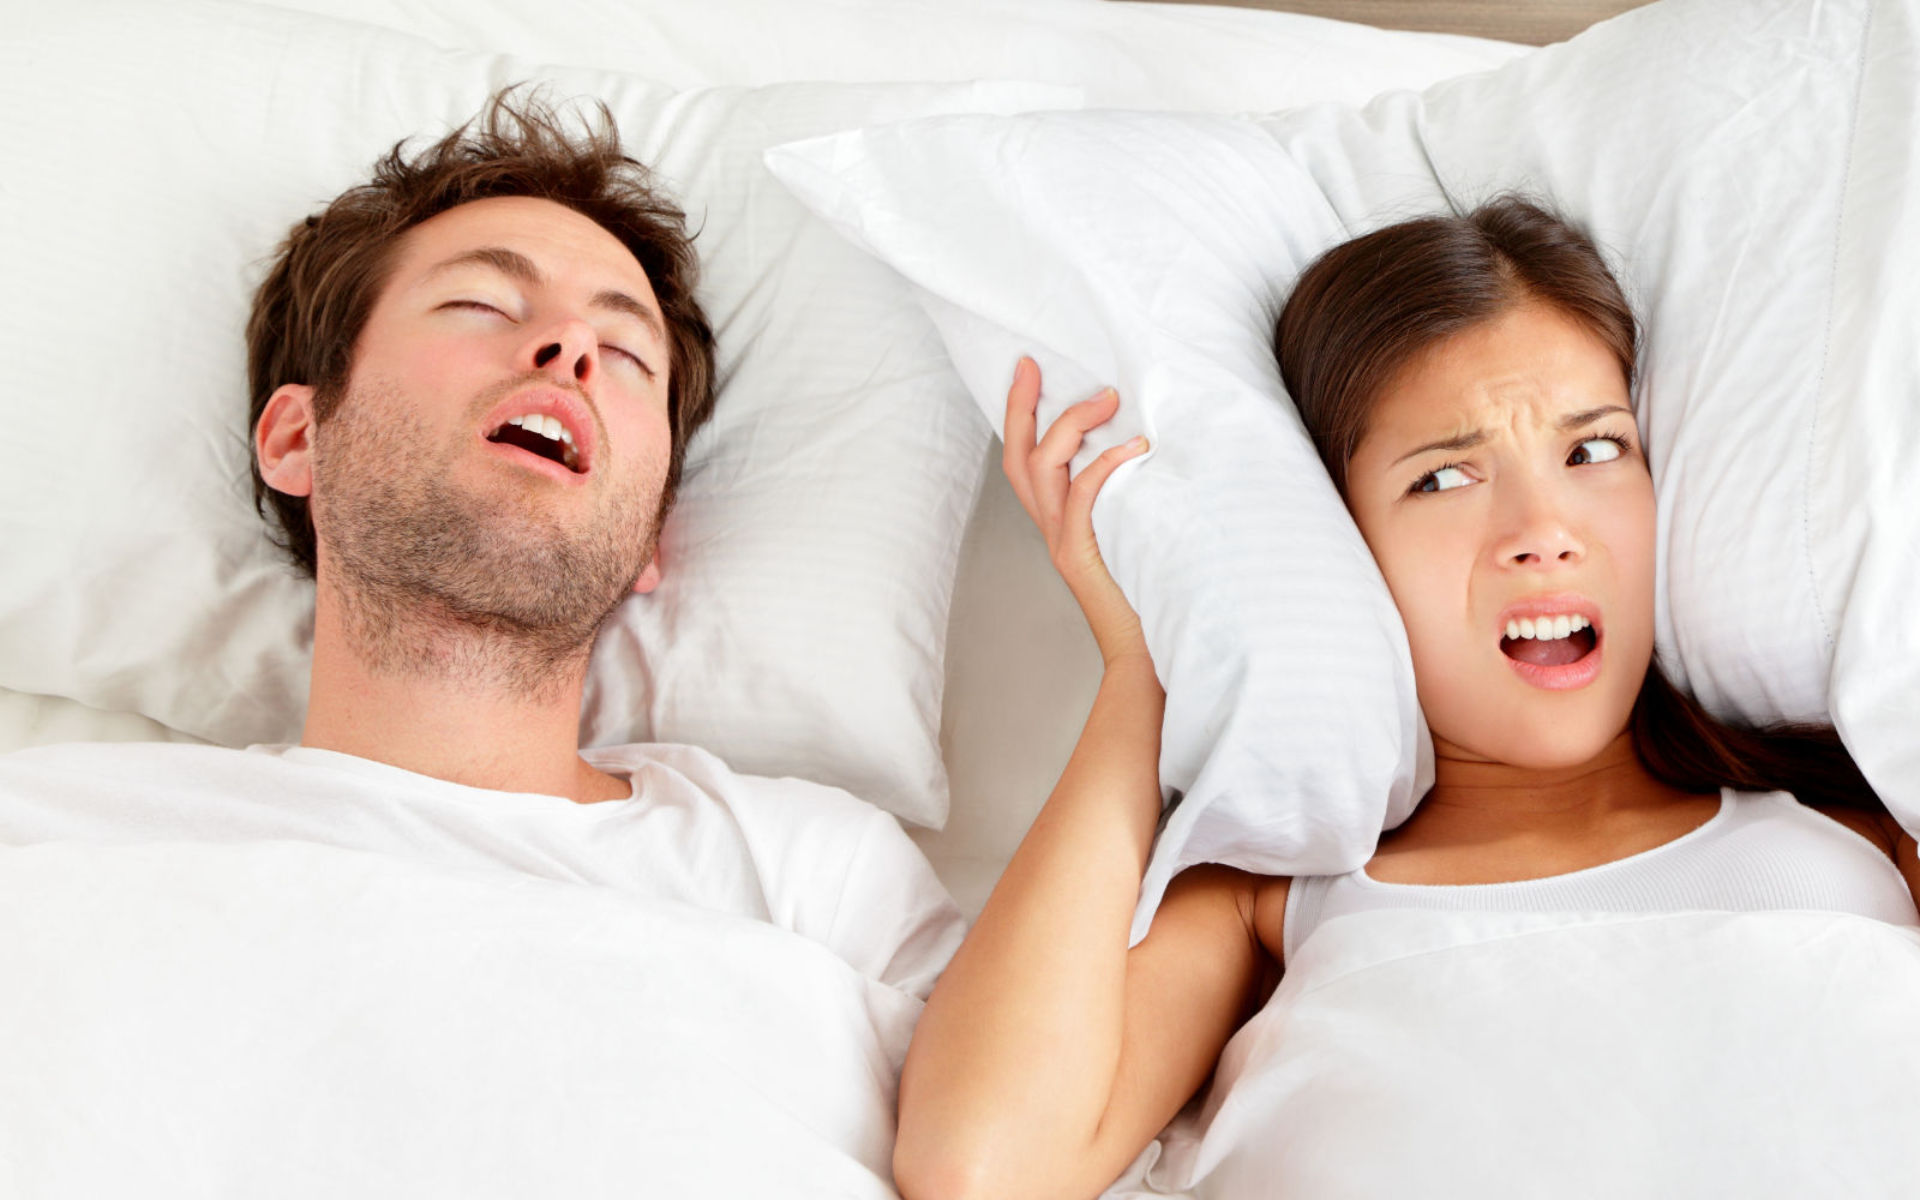 An annoyed woman covering ears with a pillow due to her partner's snoring.